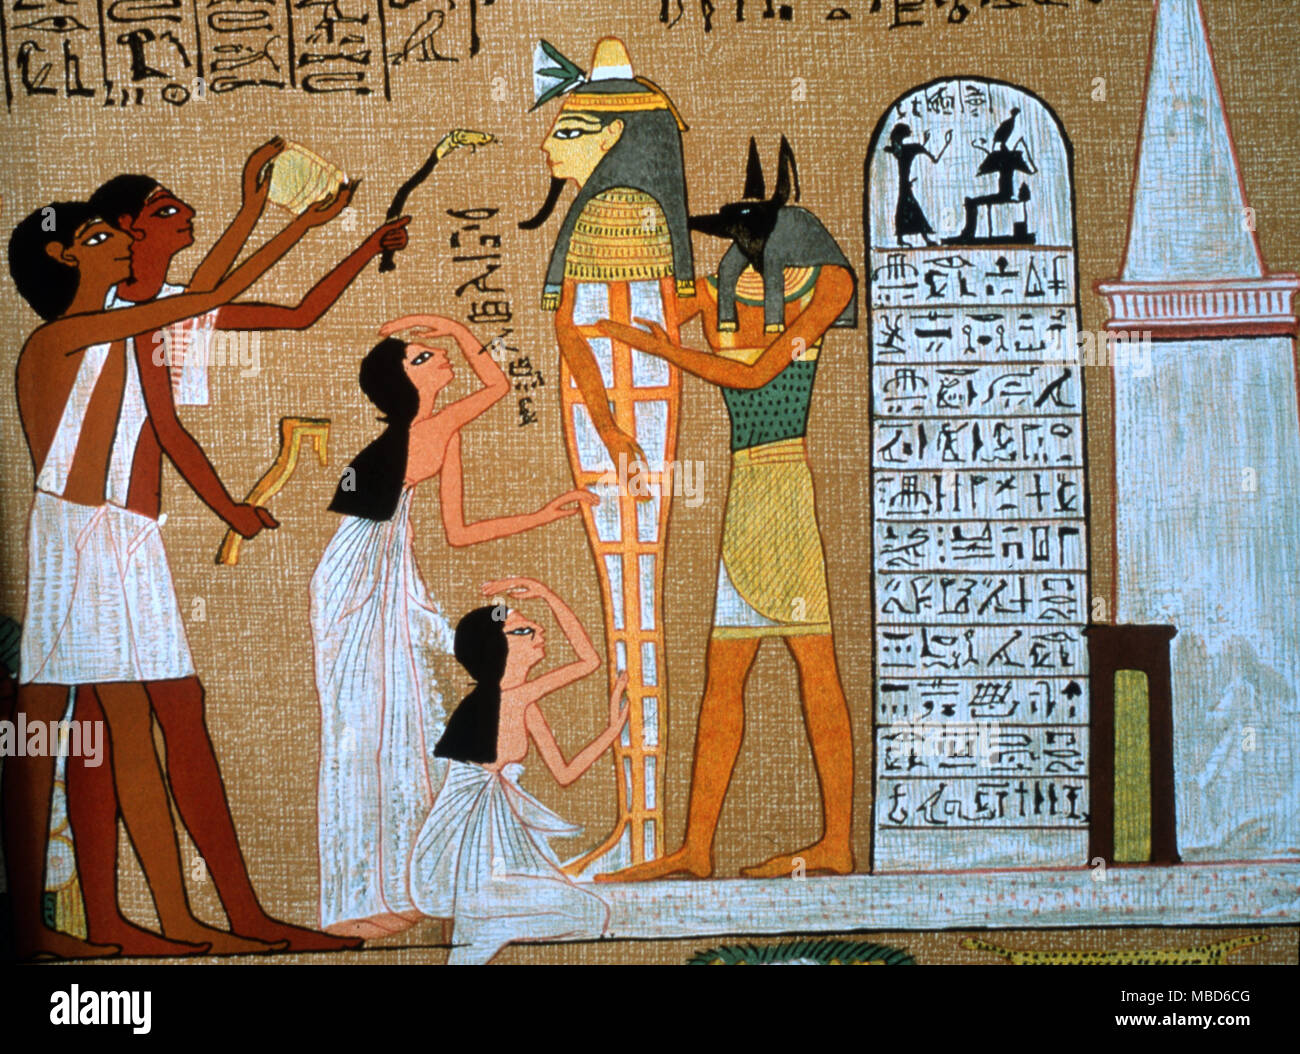 EGYPTIAN MYTHOLOGY - The ceremony of the Opening of the Mouth, the mummy of the Pharaoh being an embodiment of Horus. Detail from the Budge lithograph of the 'Egyptian Book of the Dead' Stock Photo